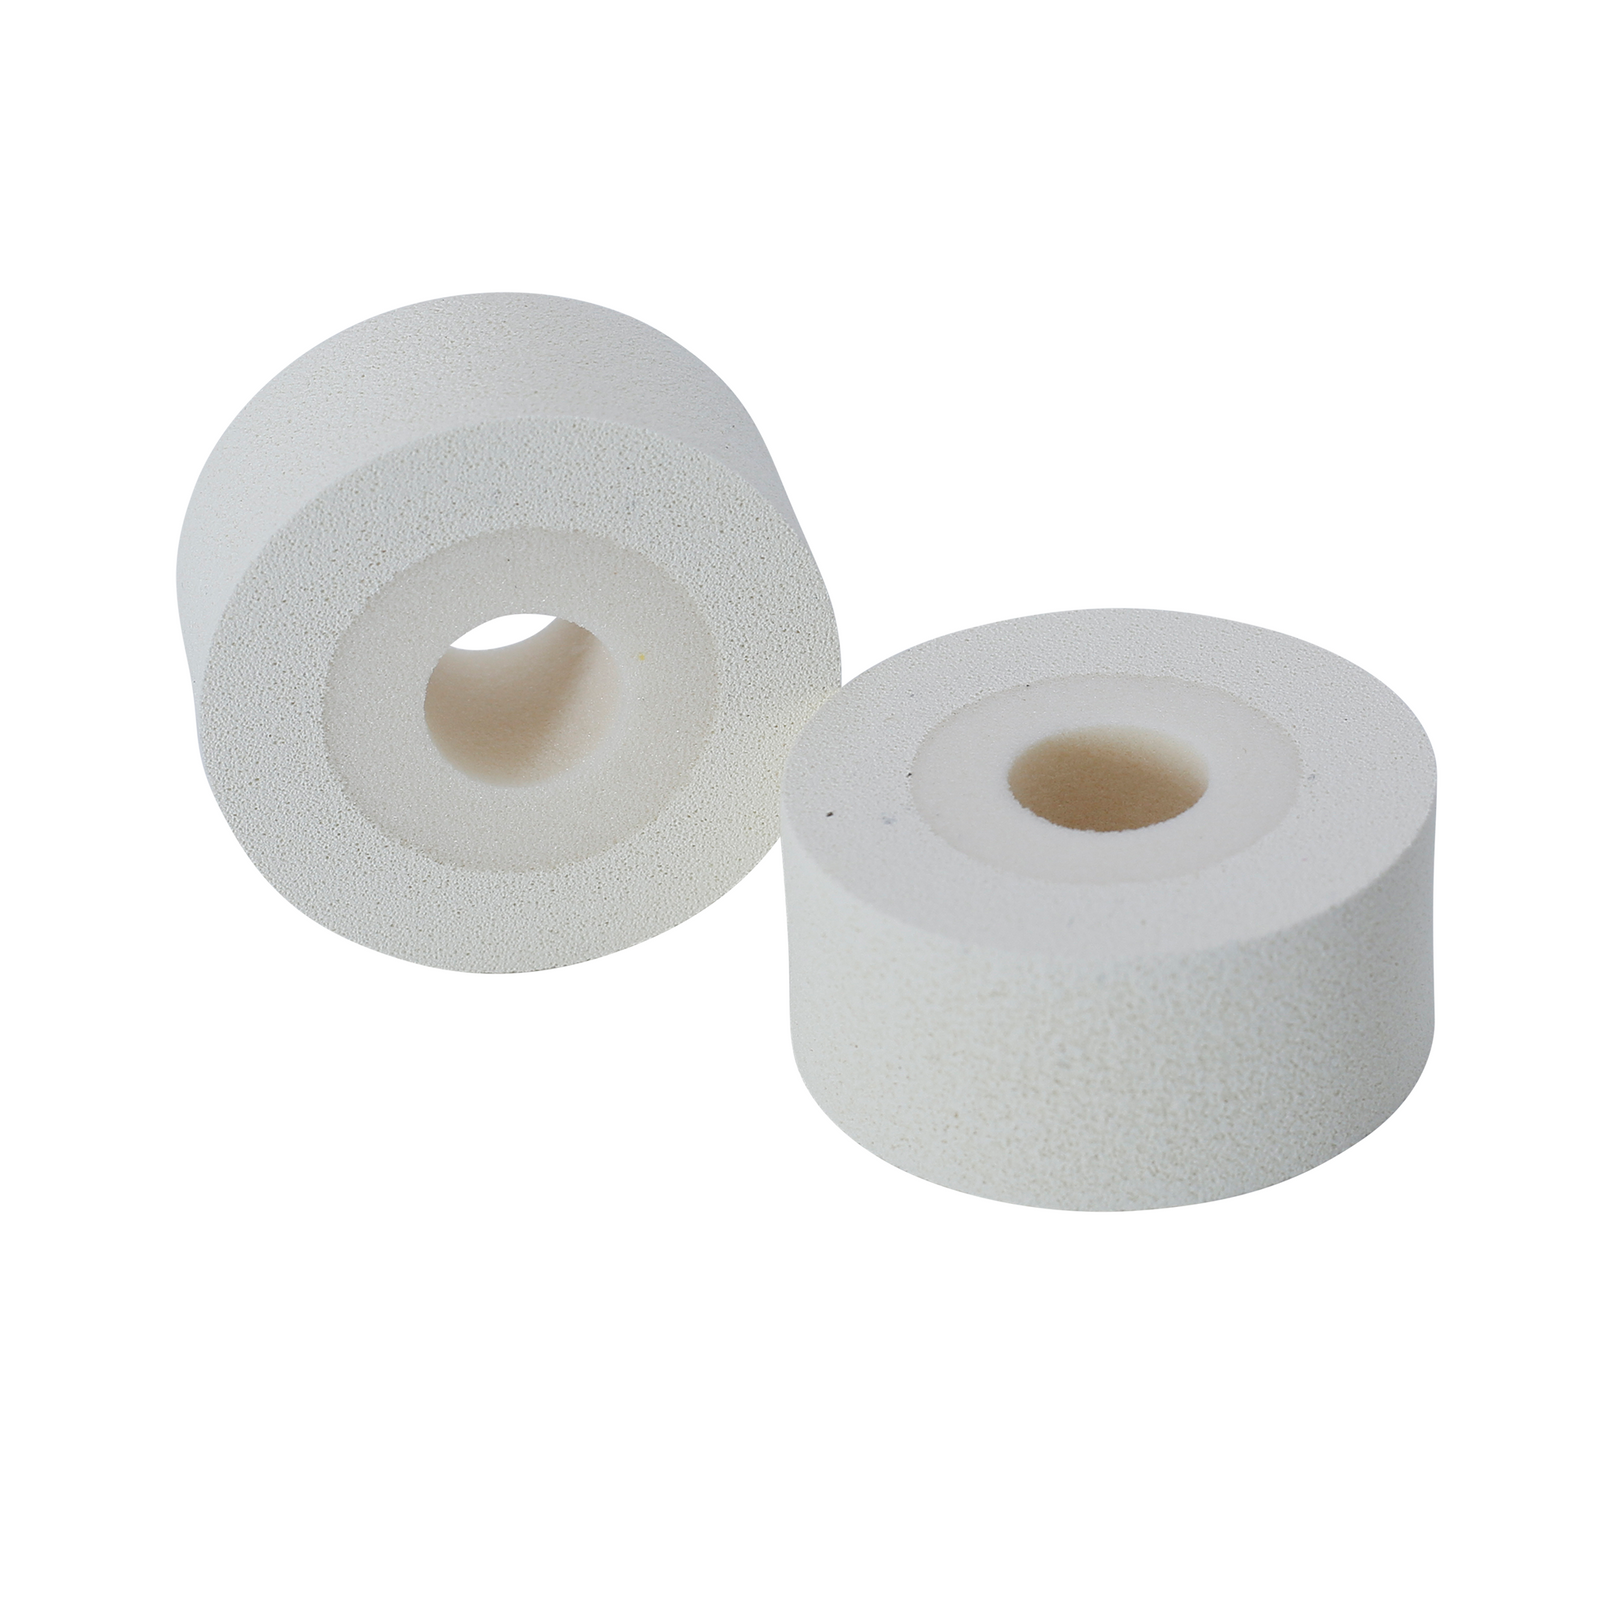 2 16mm white hot ink rolls over white background